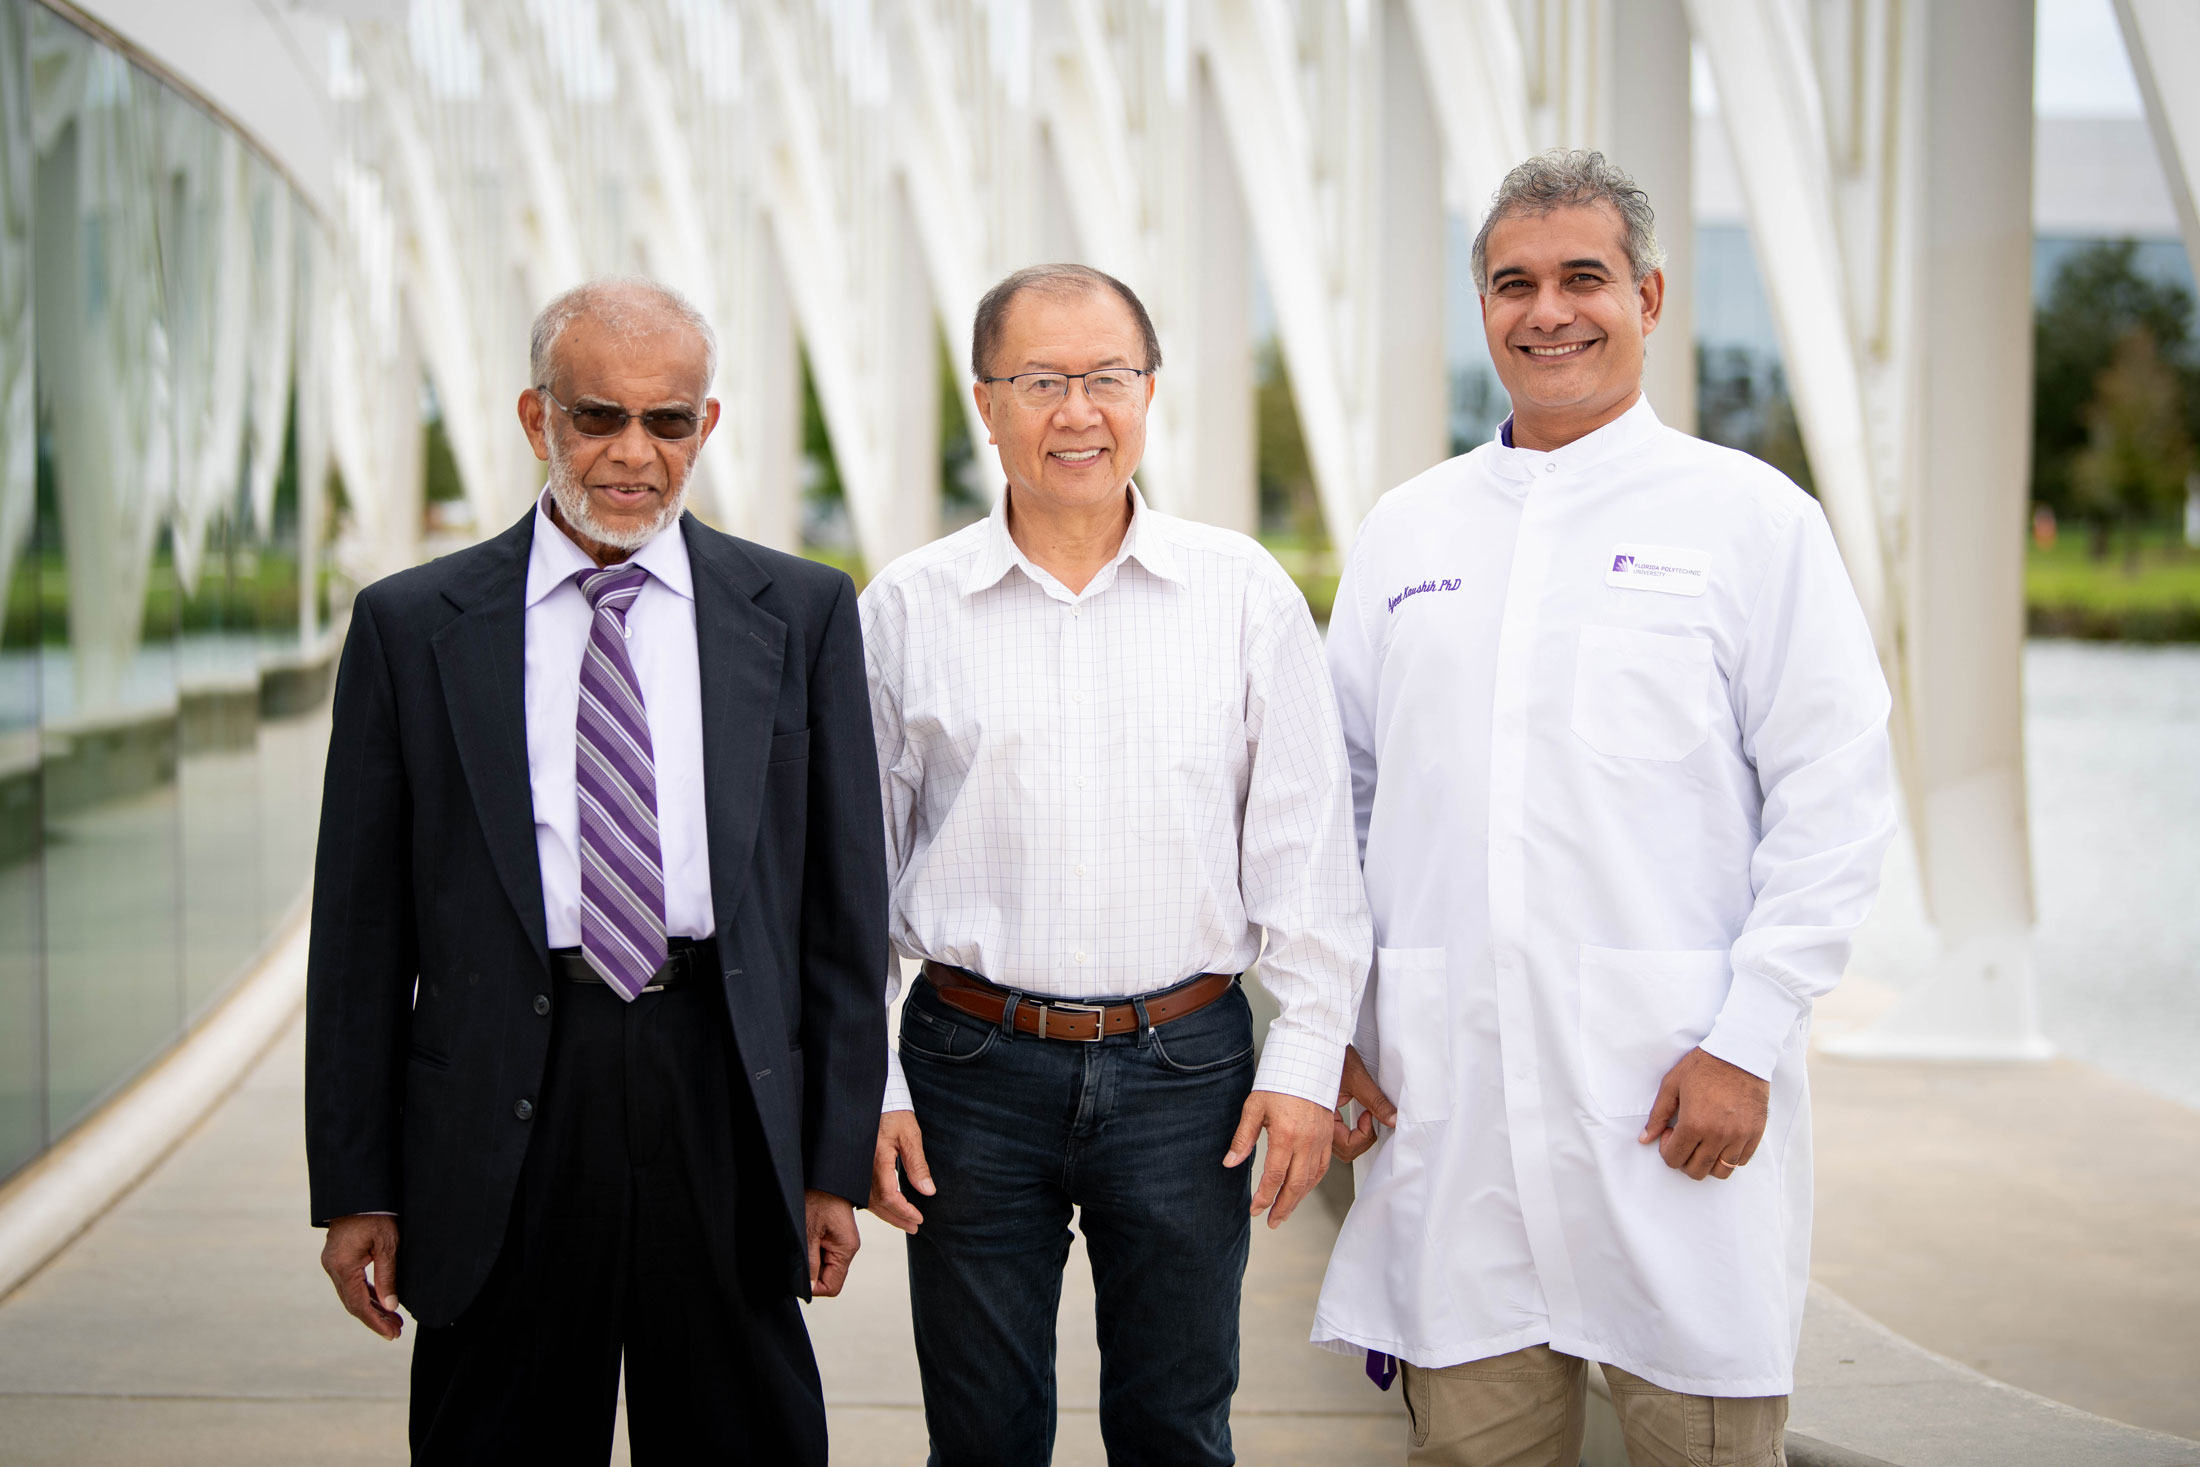 3 Florida Poly researchers among world’s top 2% of scientists